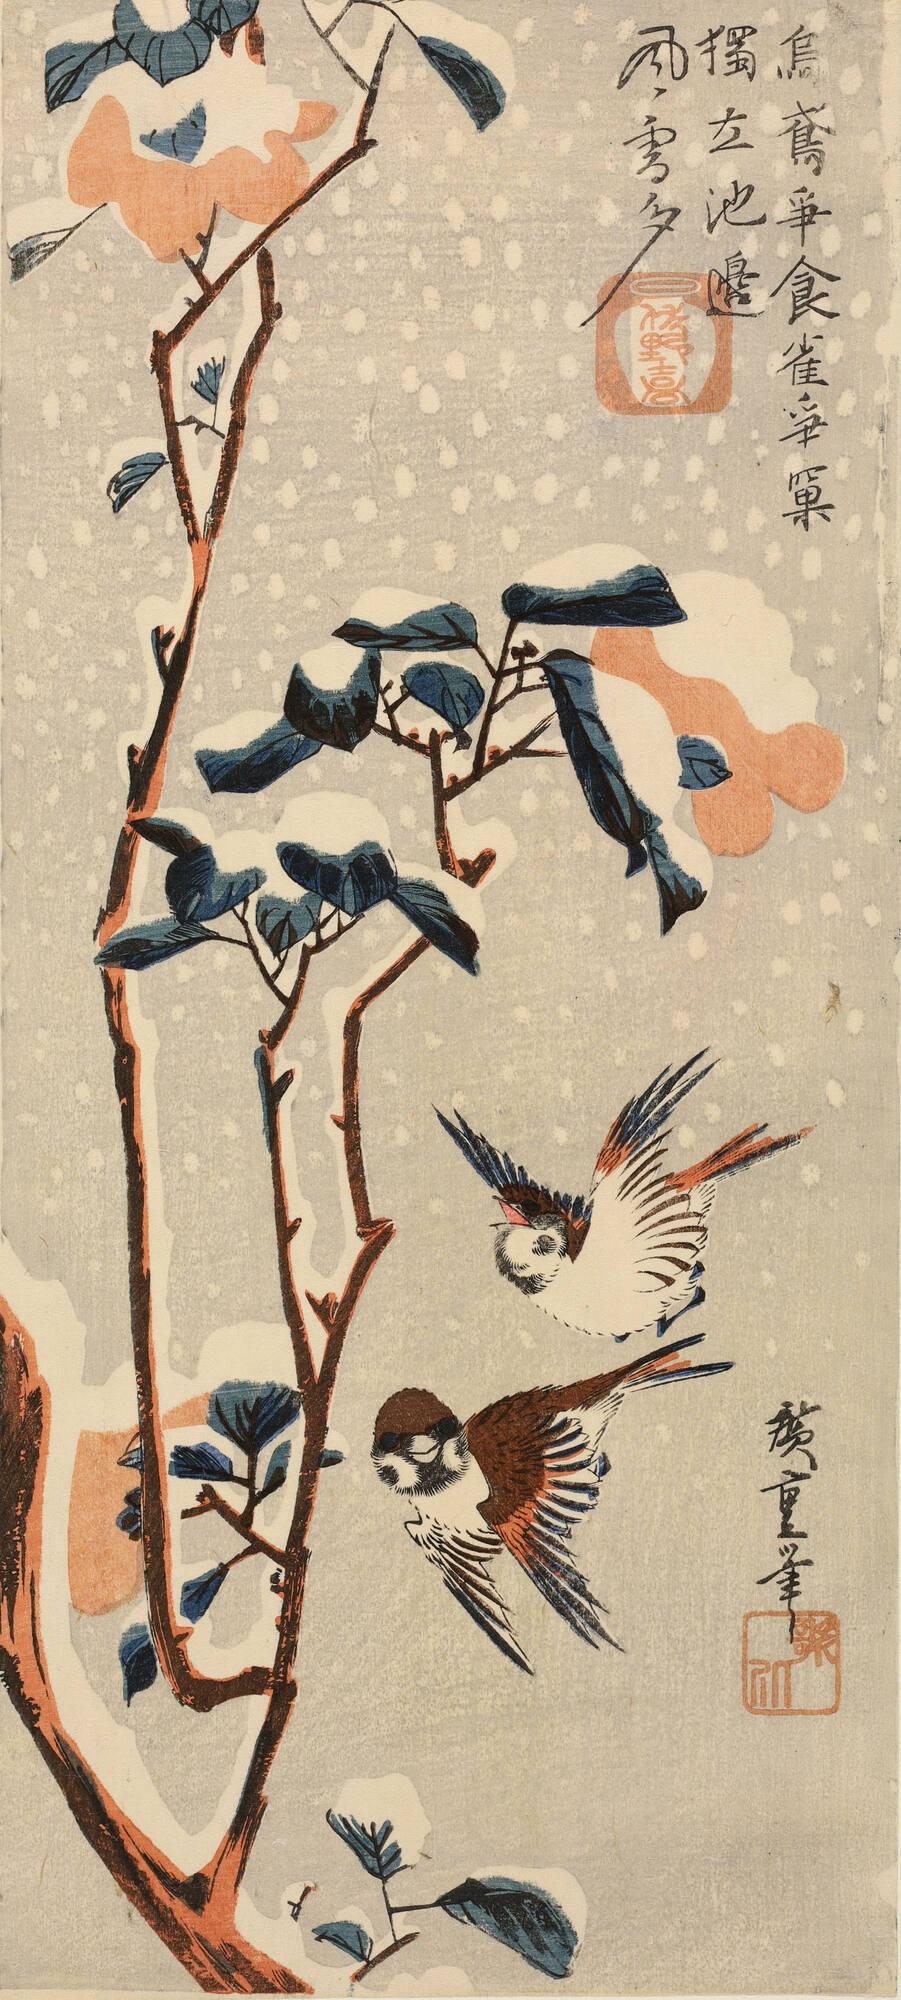 Sparrows and Winter-flowering Camellia in Snow